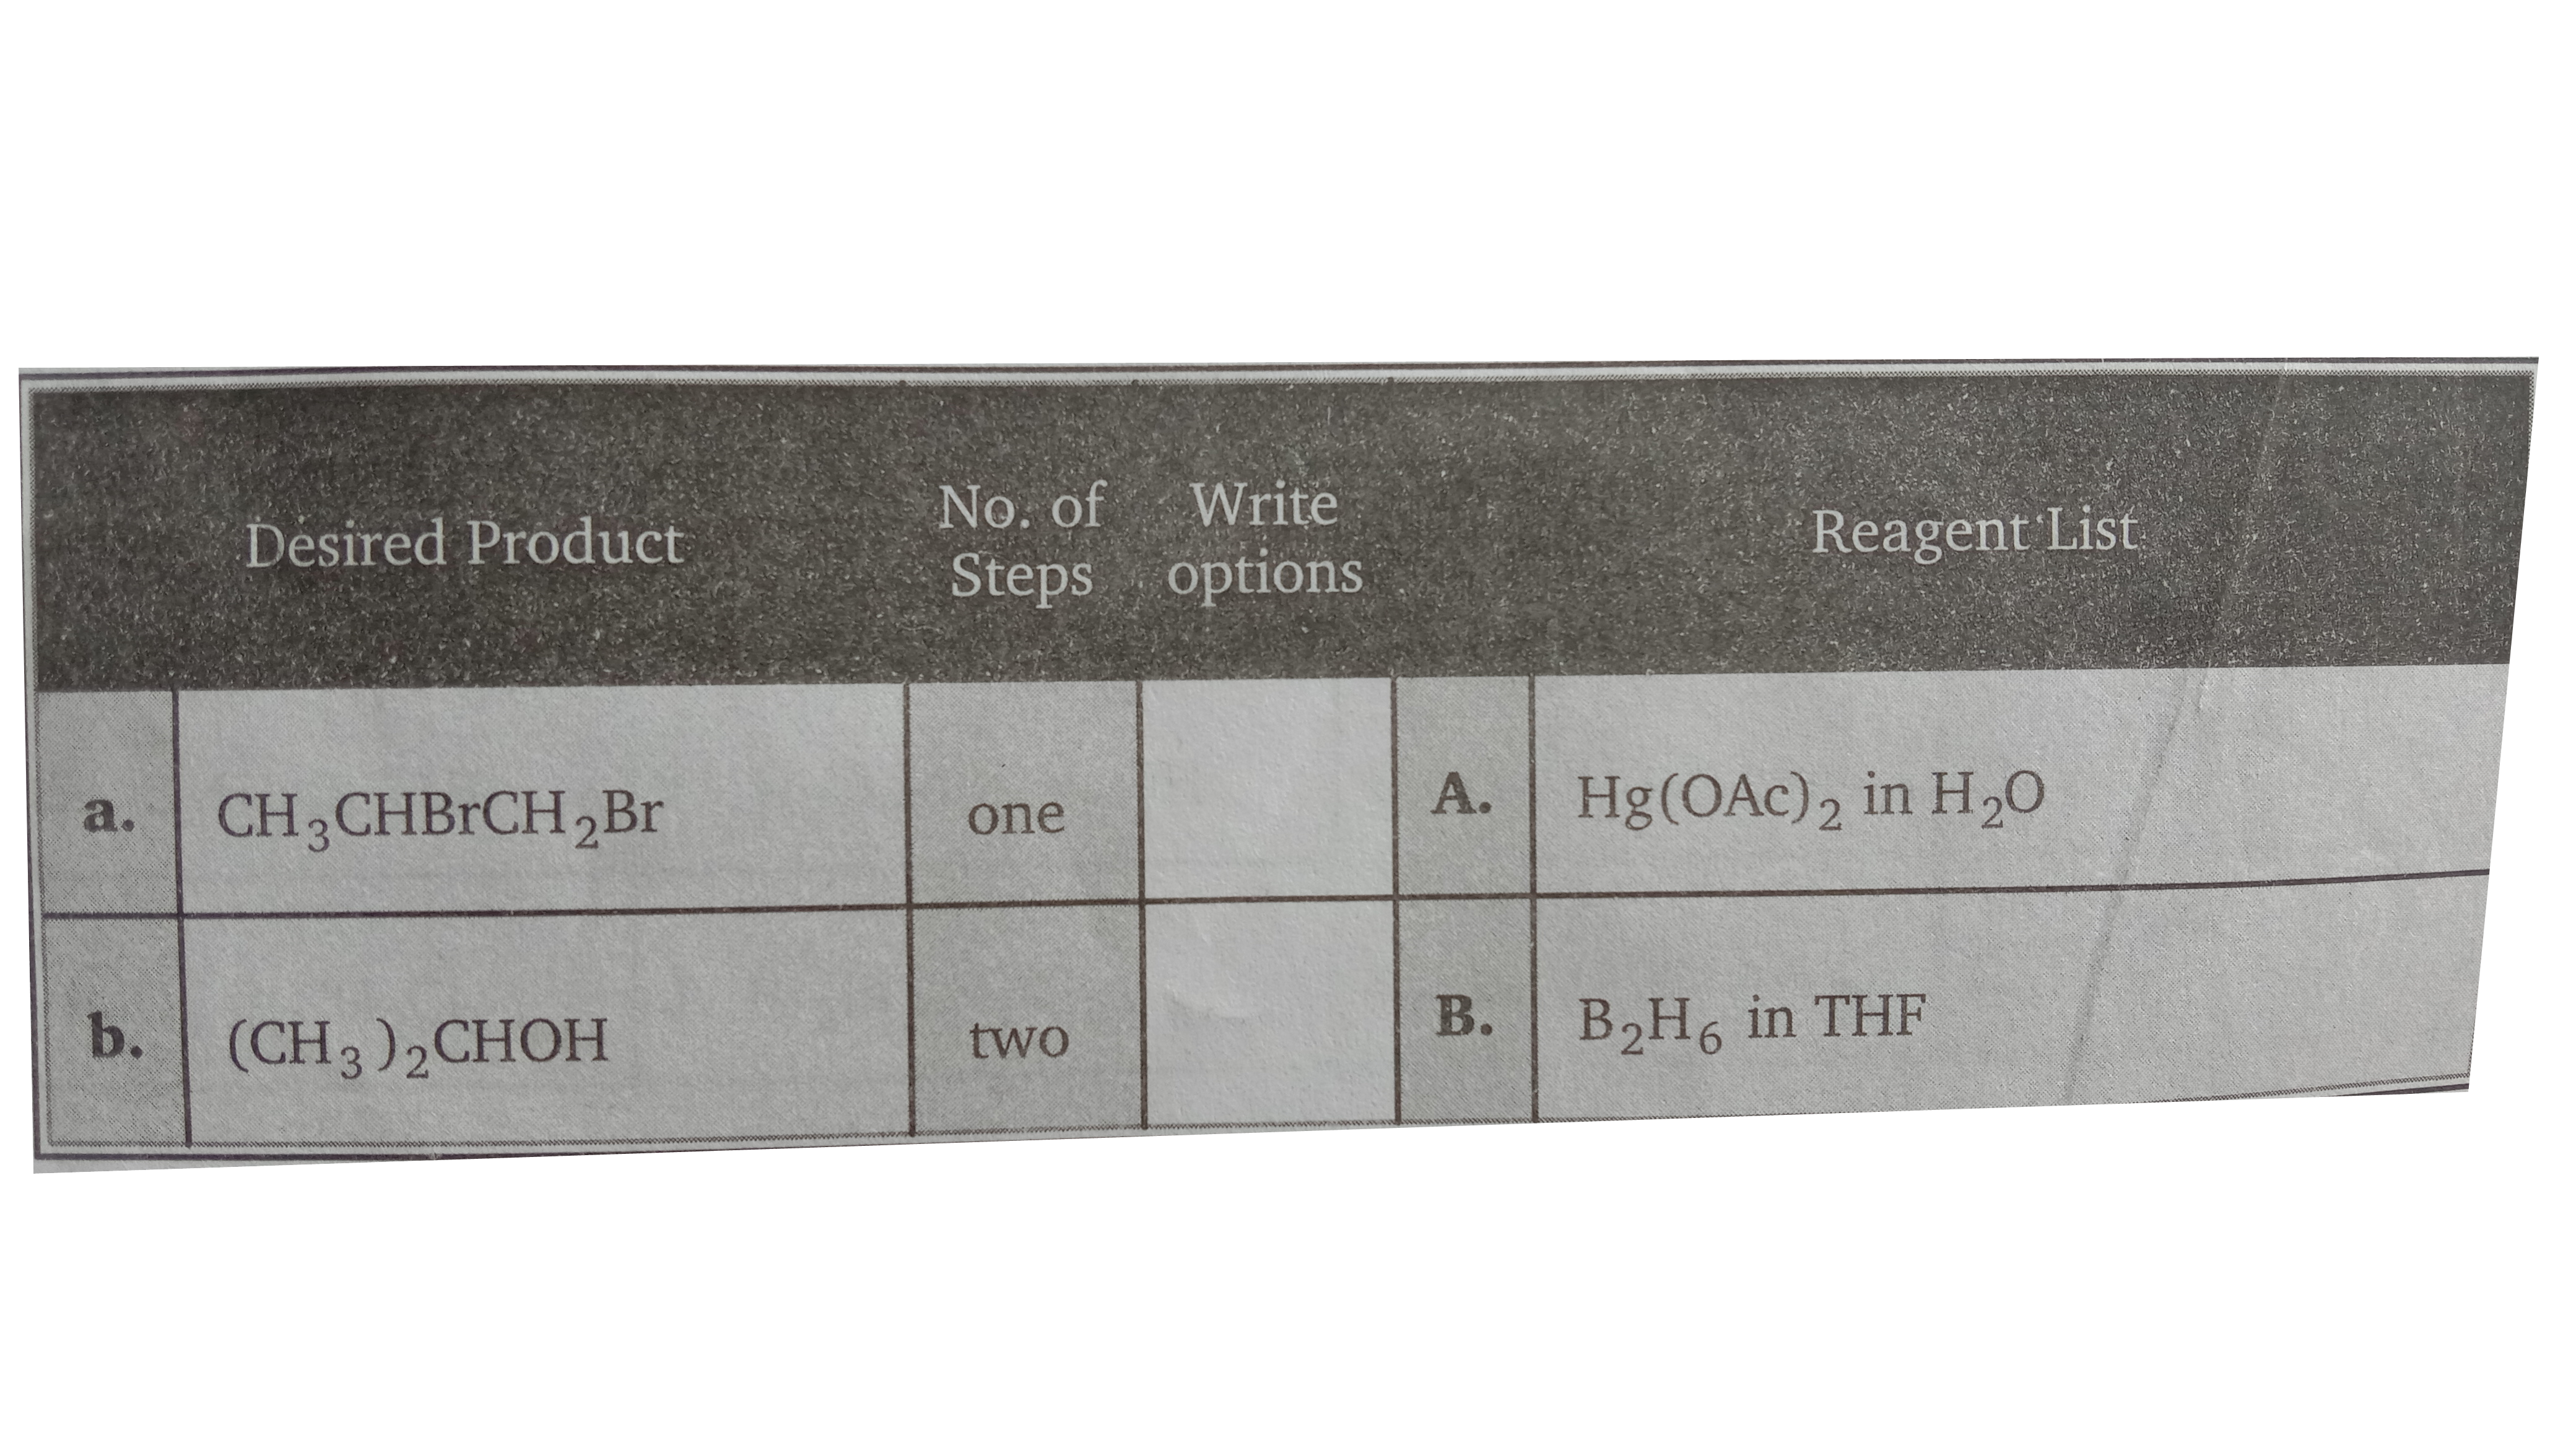 Propene (CH(3)-CH=CH(2)) can be transformed to compounds (a to j) listed in the left-hand column.   Write letter designating the reagent, you believe desired transformation. In the case of multi-step sequence write the reagent in the order they are to be used.